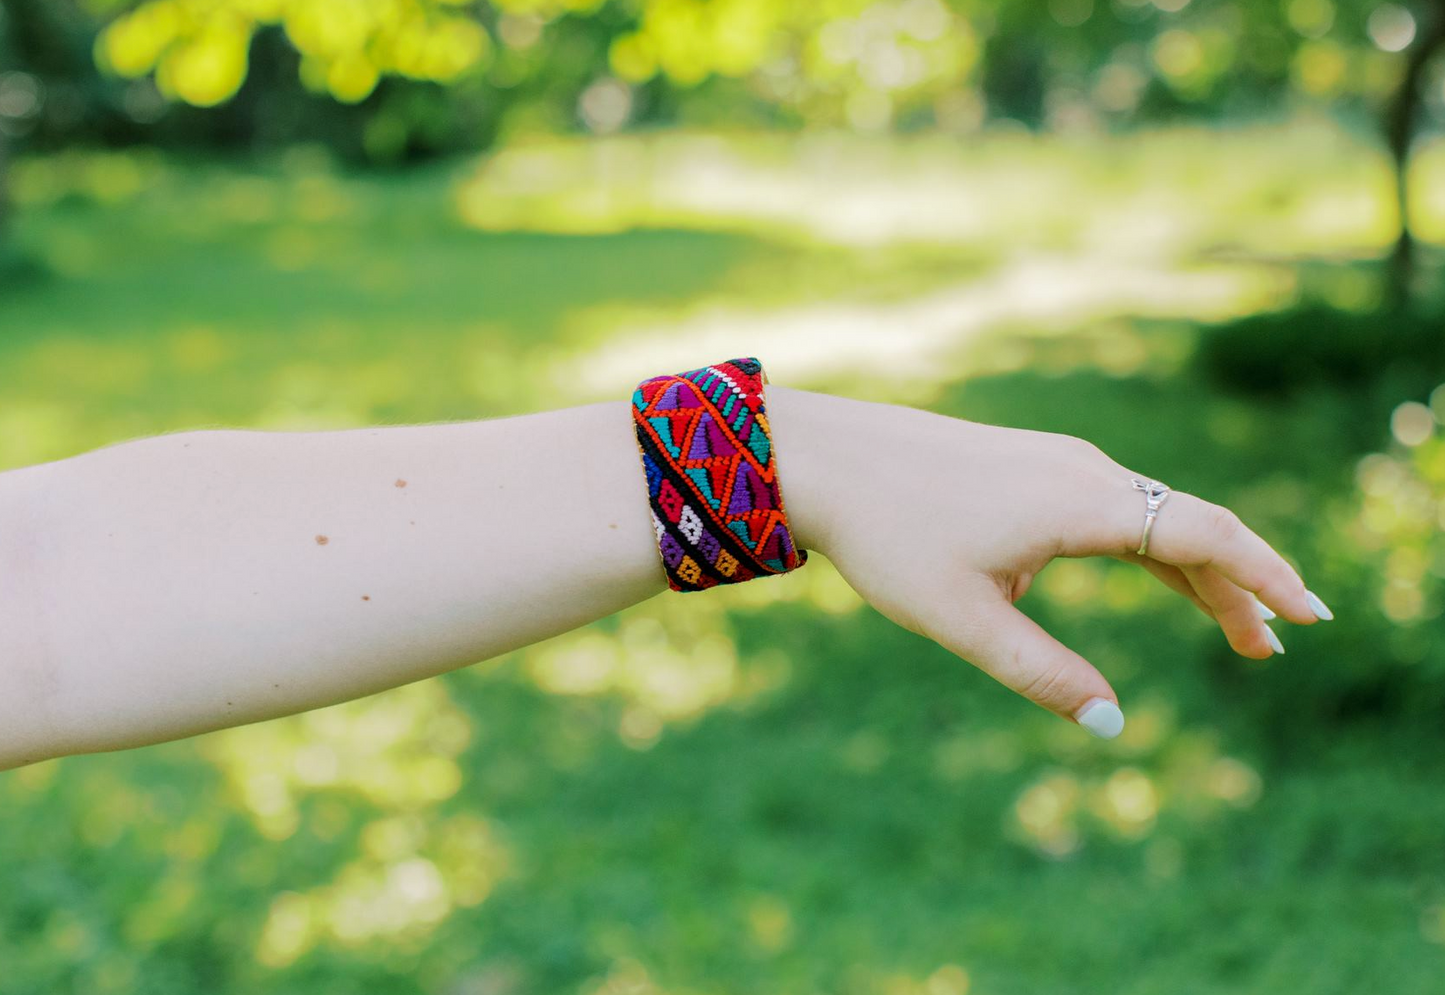 Geometric Huipil Large Embroidered Cuff